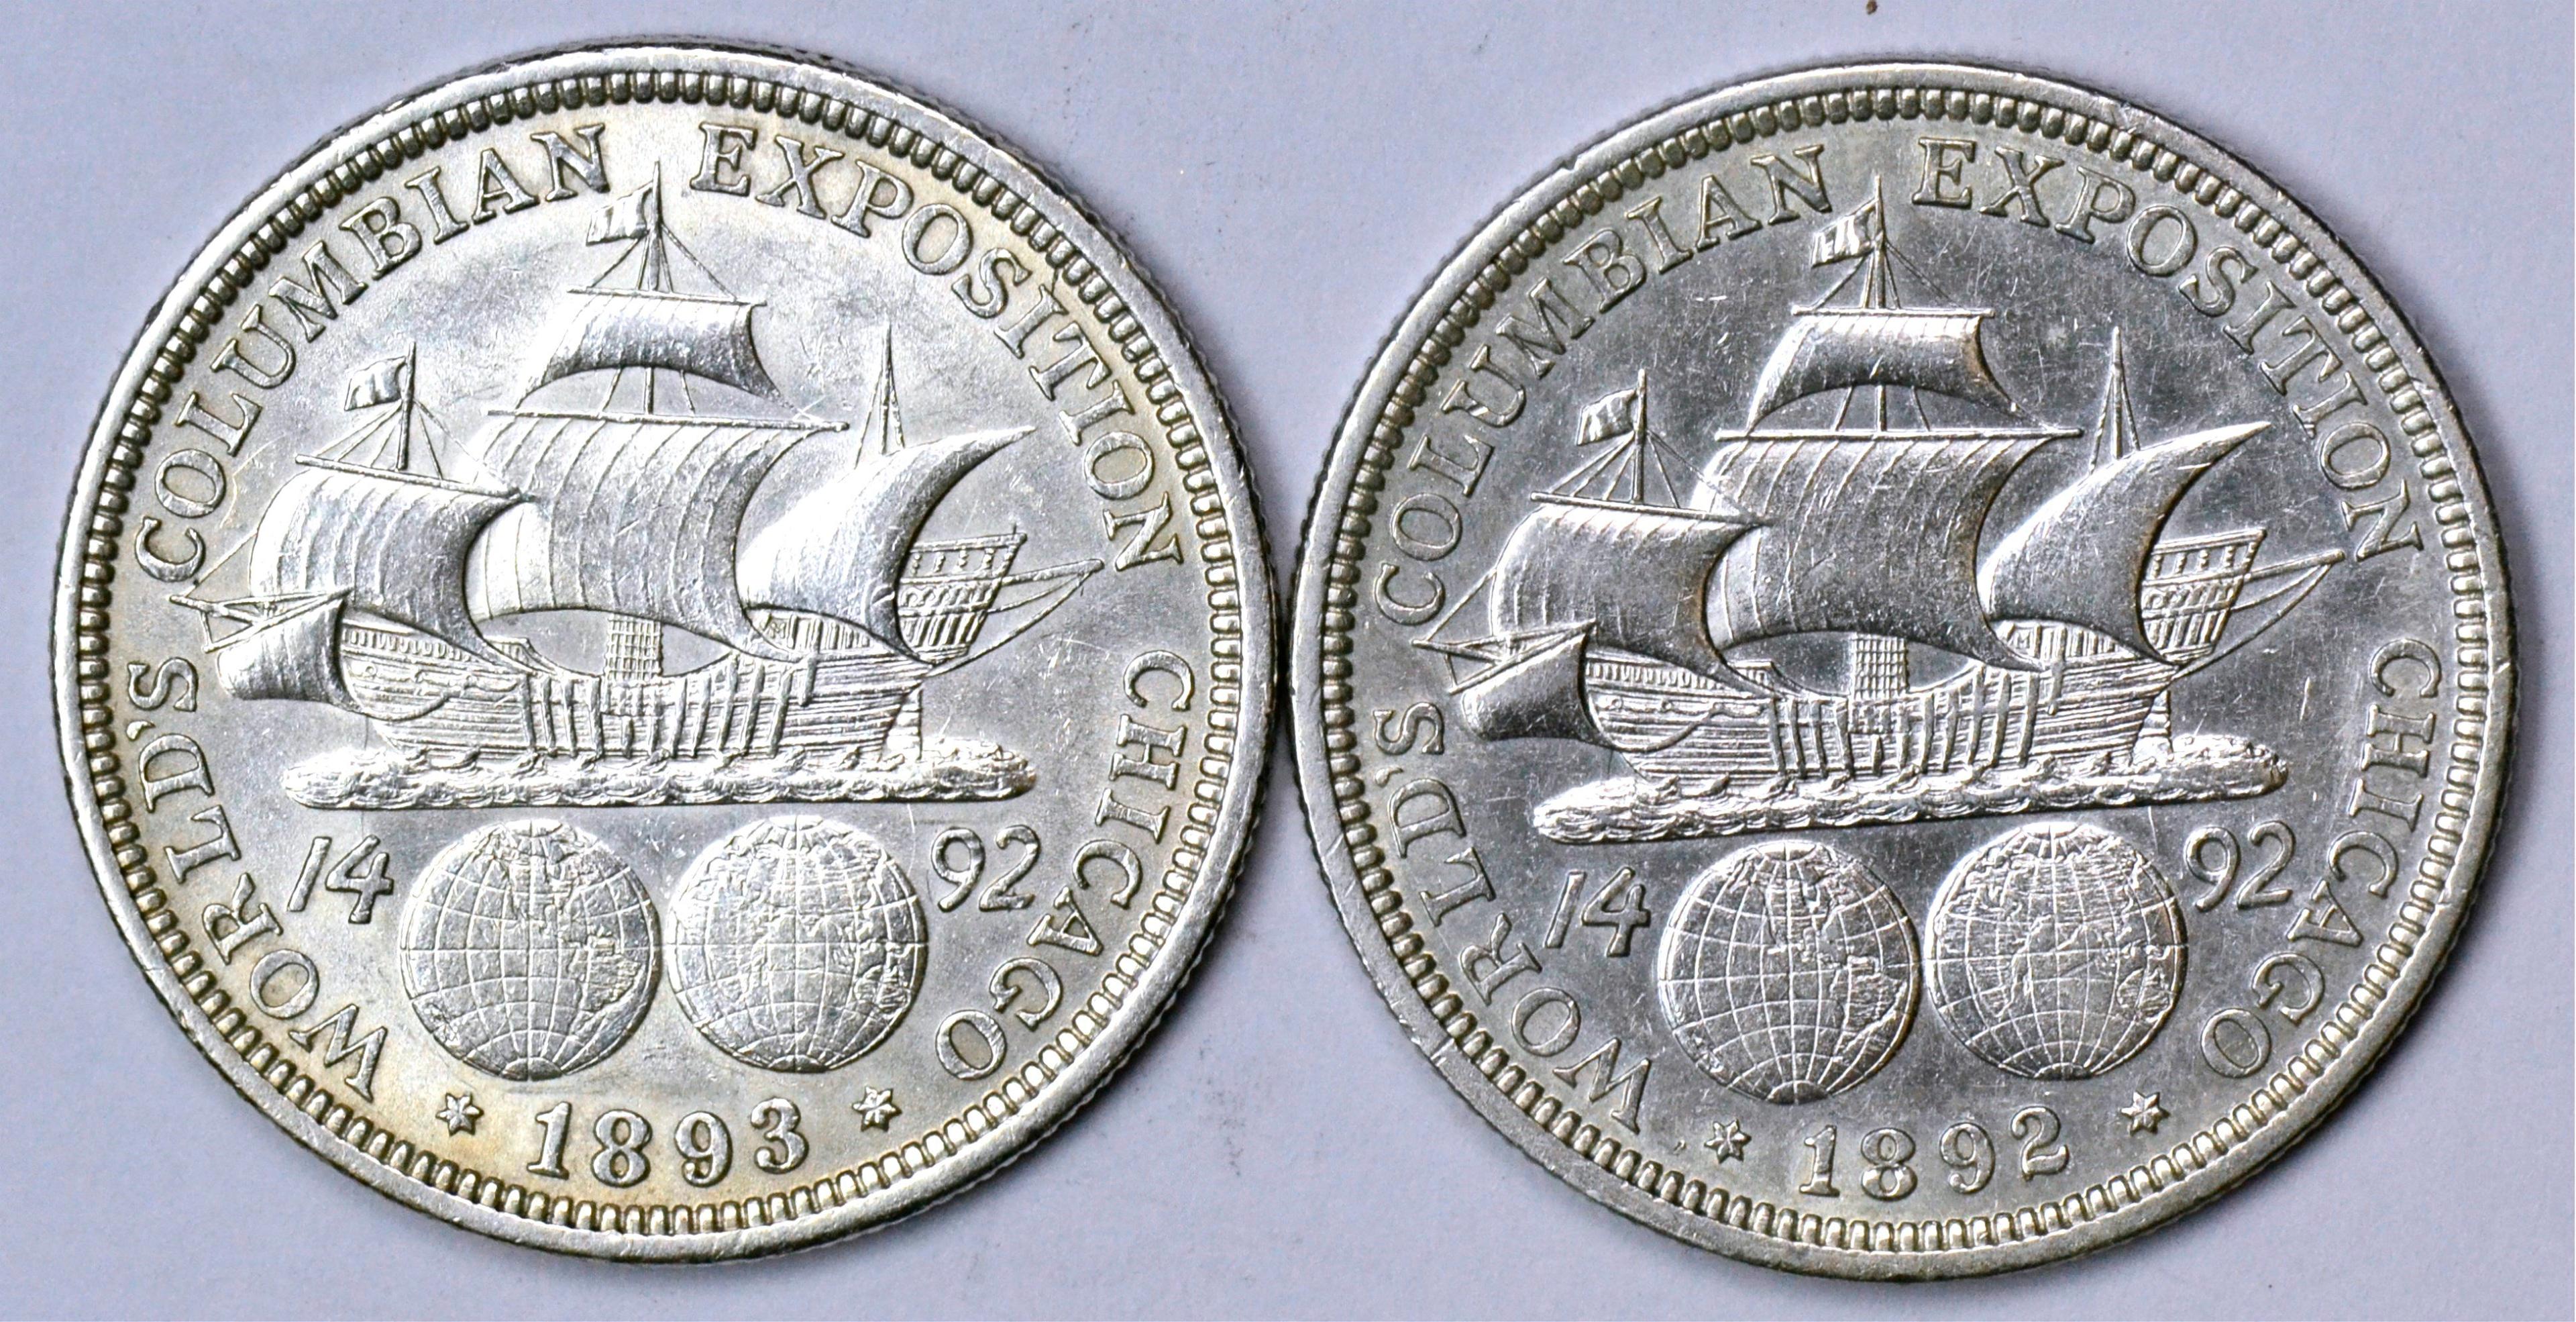 TWO (2) COLUMBIAN EXPOSITION HALVES - 1892 & 1893